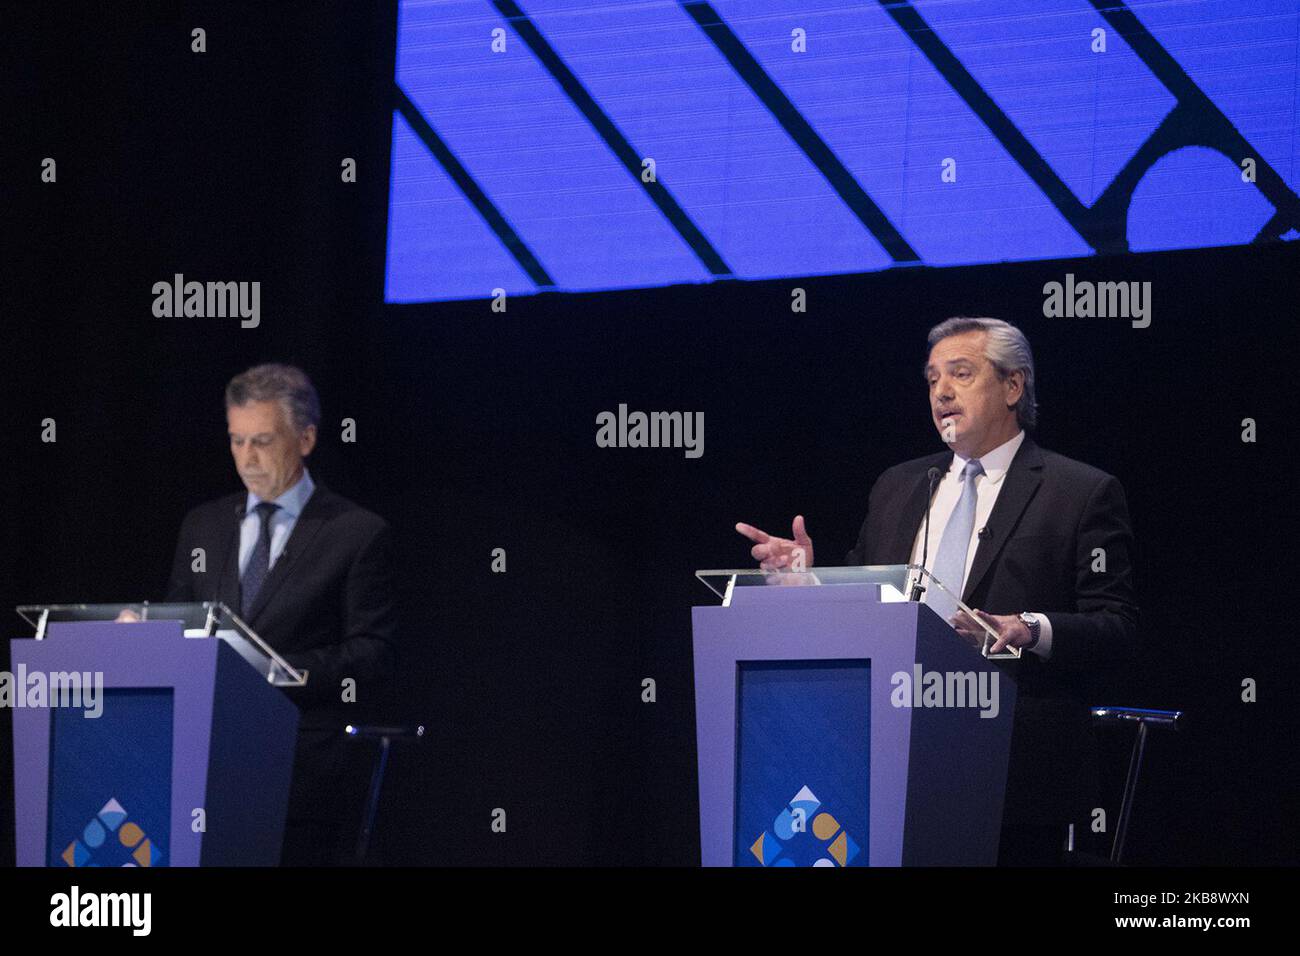 Mauricio Macri, Argentina's president, left, listens while Alberto Fernandez, presidential candidate for Frente de Todos party, speaks during a presidential candidate debate in Buenos Aires, Argentina, on Sunday, Oct. 20, 2019. (Photo by MatÃas Baglietto/NurPhoto) Stock Photo